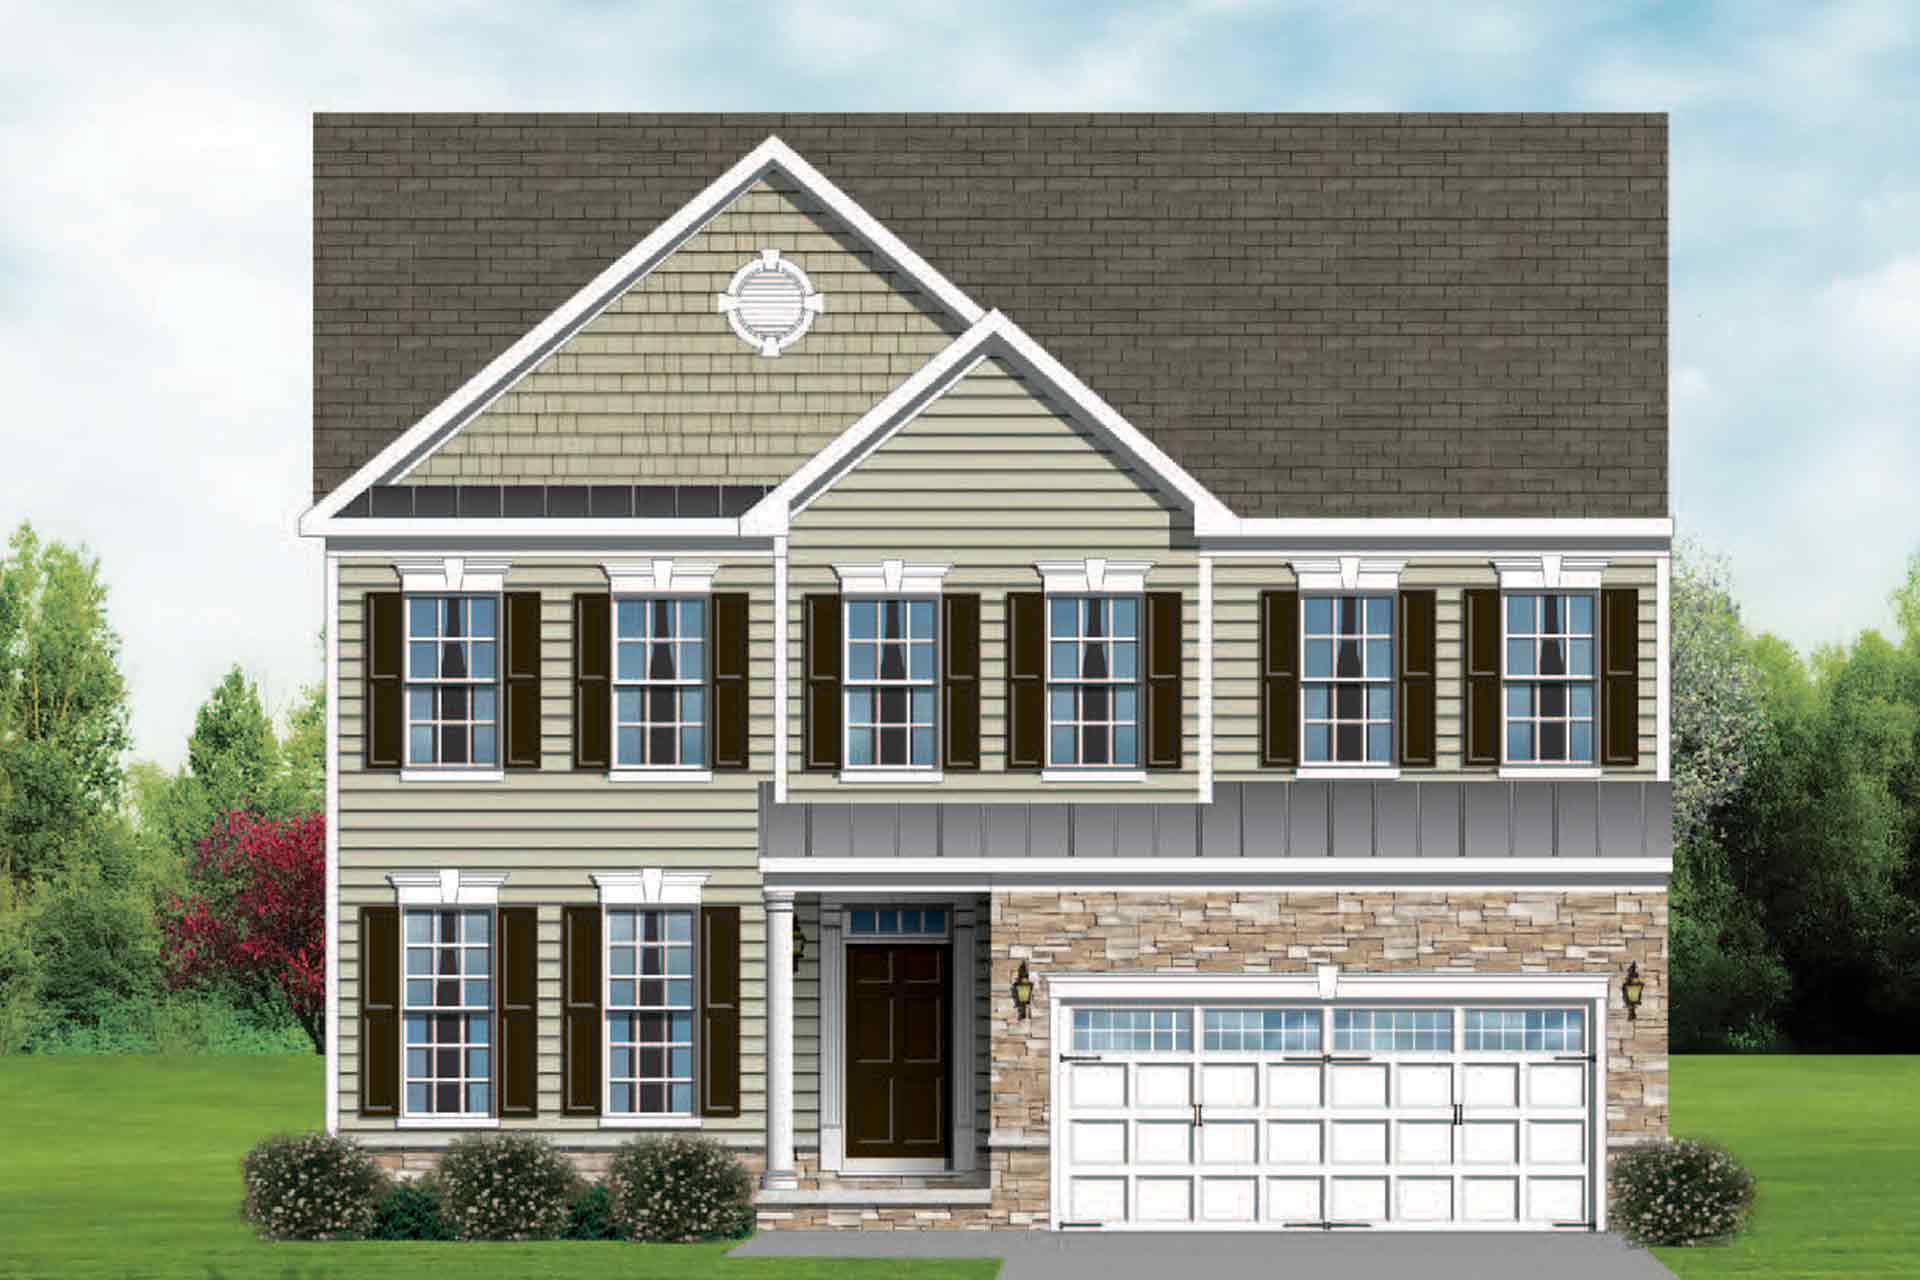 Patuxent Rendering